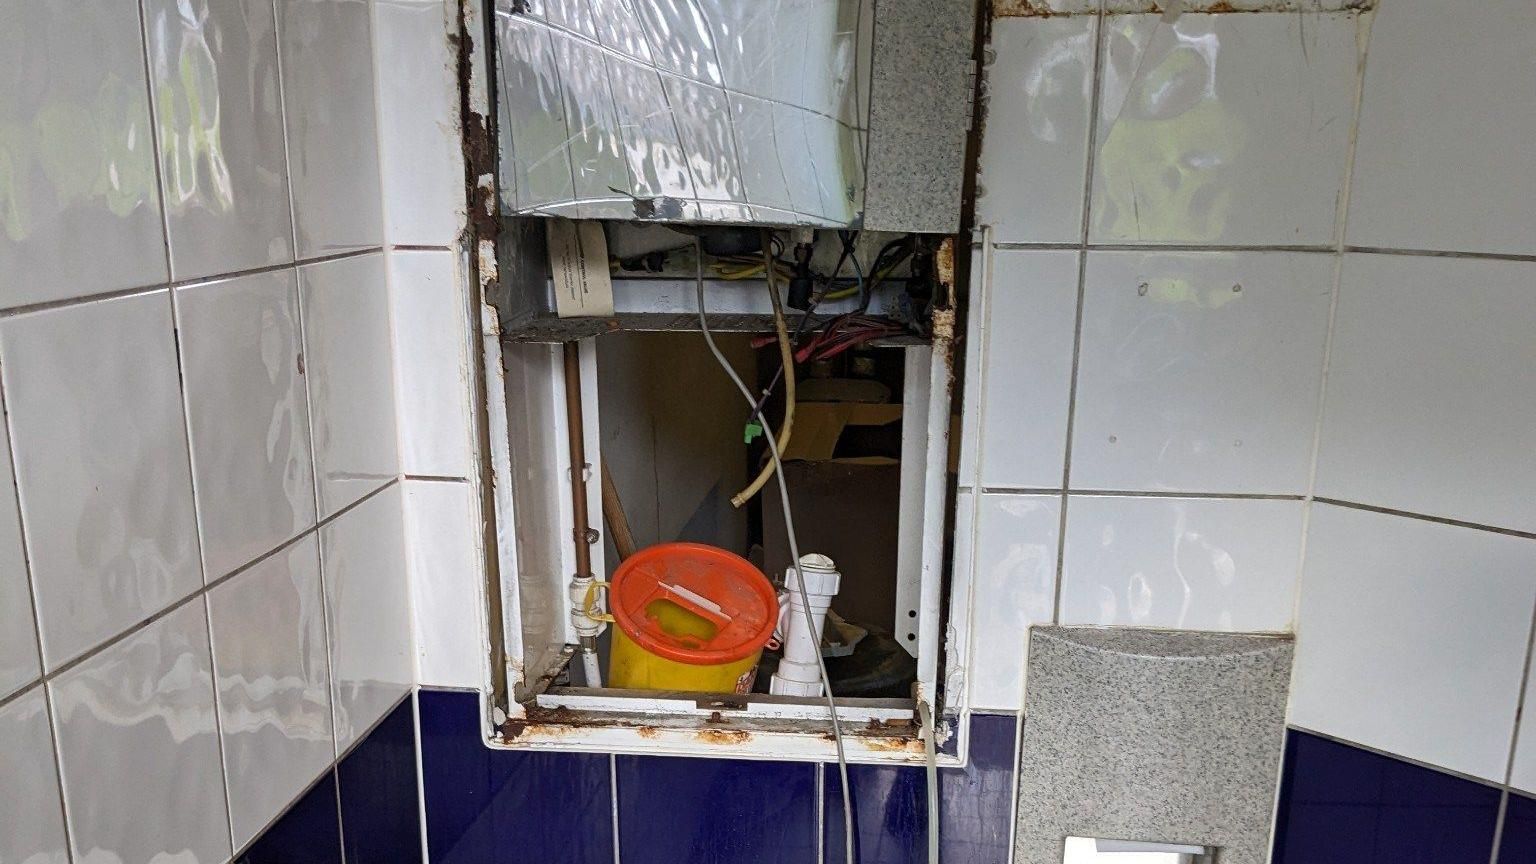 Image shows damage to the toilets